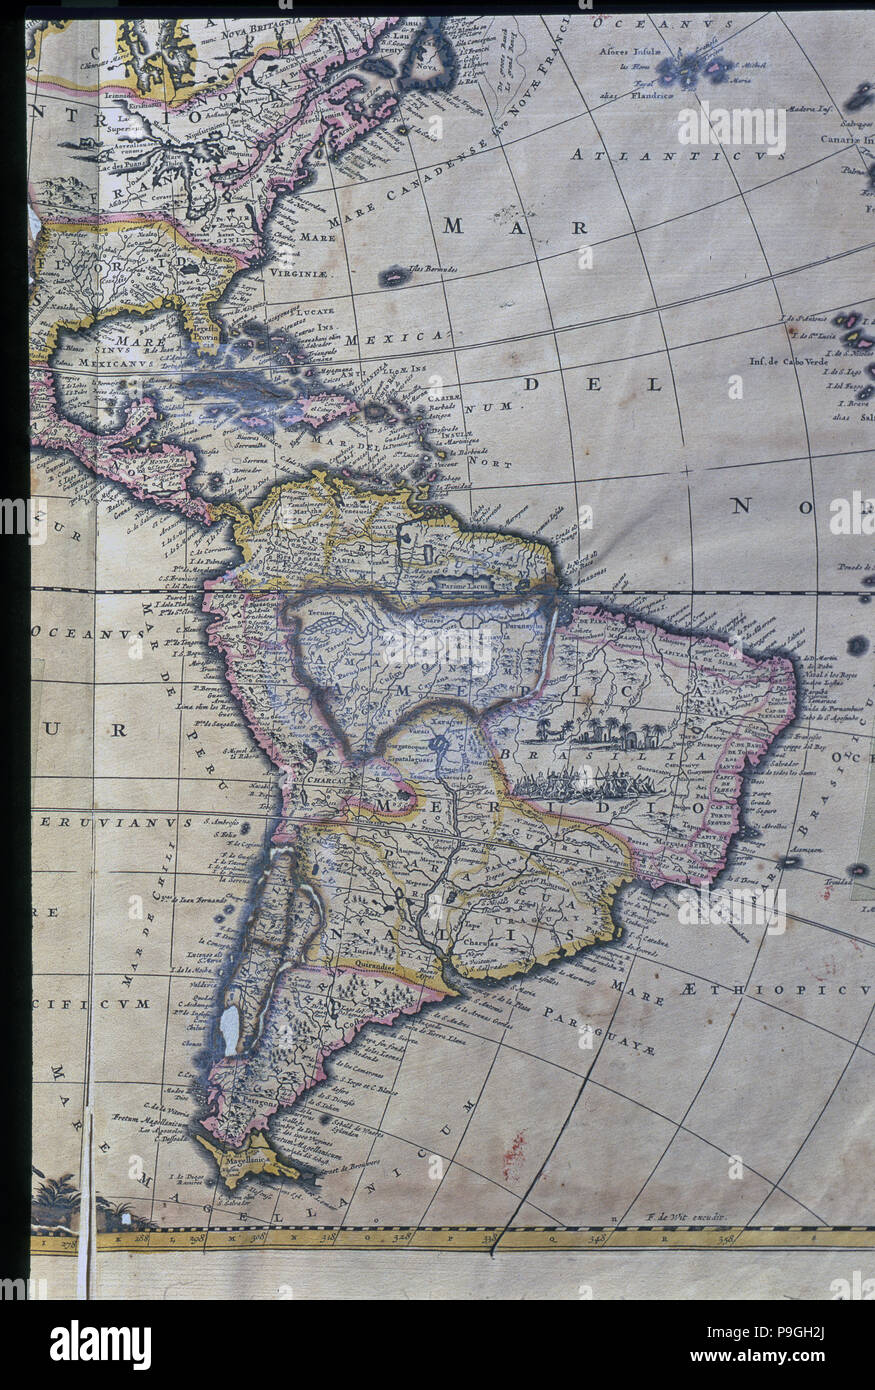 Map of South America, West Indies, Central America and east coast of North America Atlas. Stock Photo